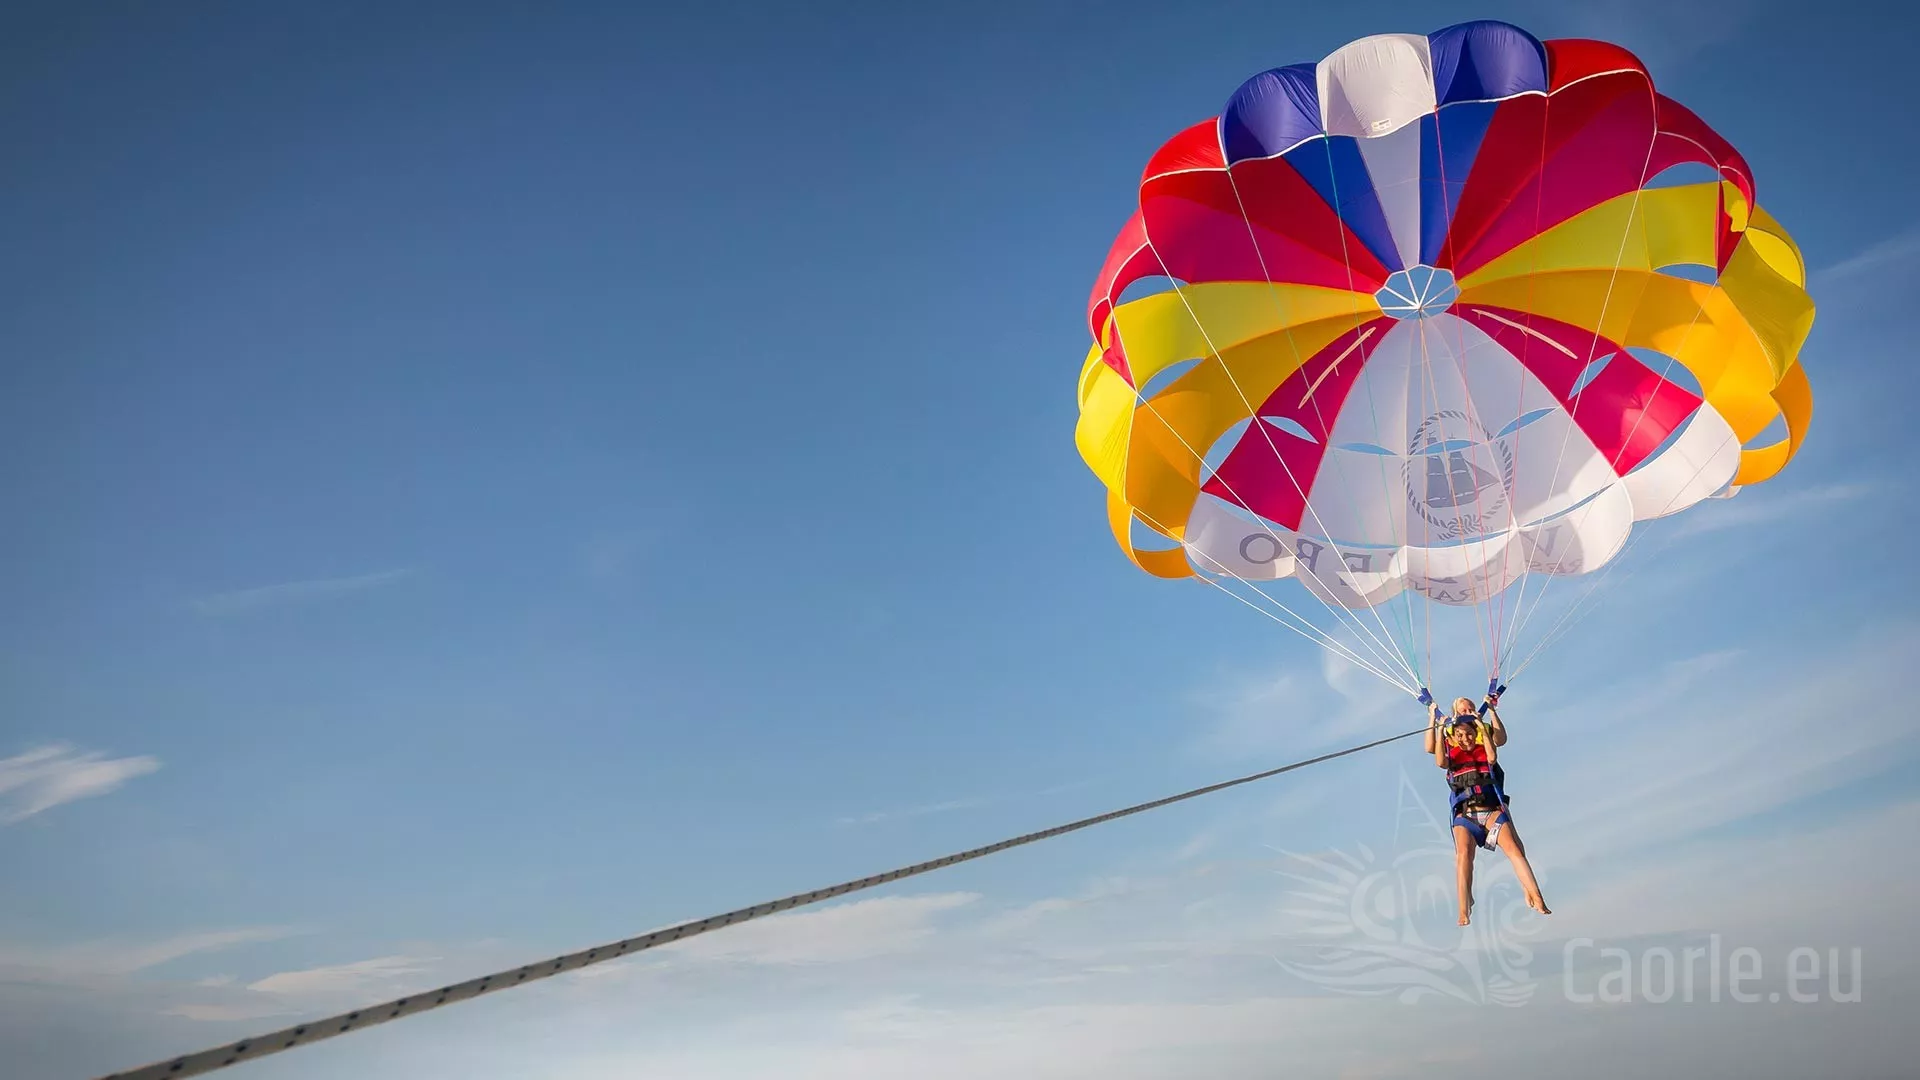 Venice Parasailing in USA, North America | Parasailing - Rated 4.5